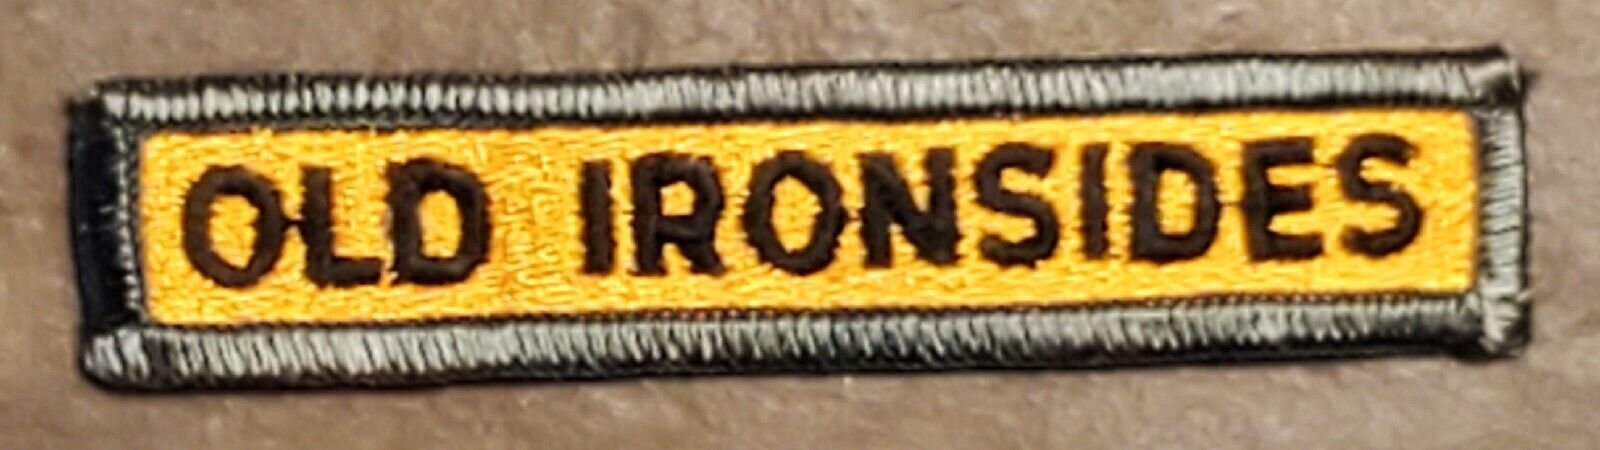 Vietnam Cold War Era US Army 1st ARMORED Division OLD IRONSIDES Tab Patch 3.5 in